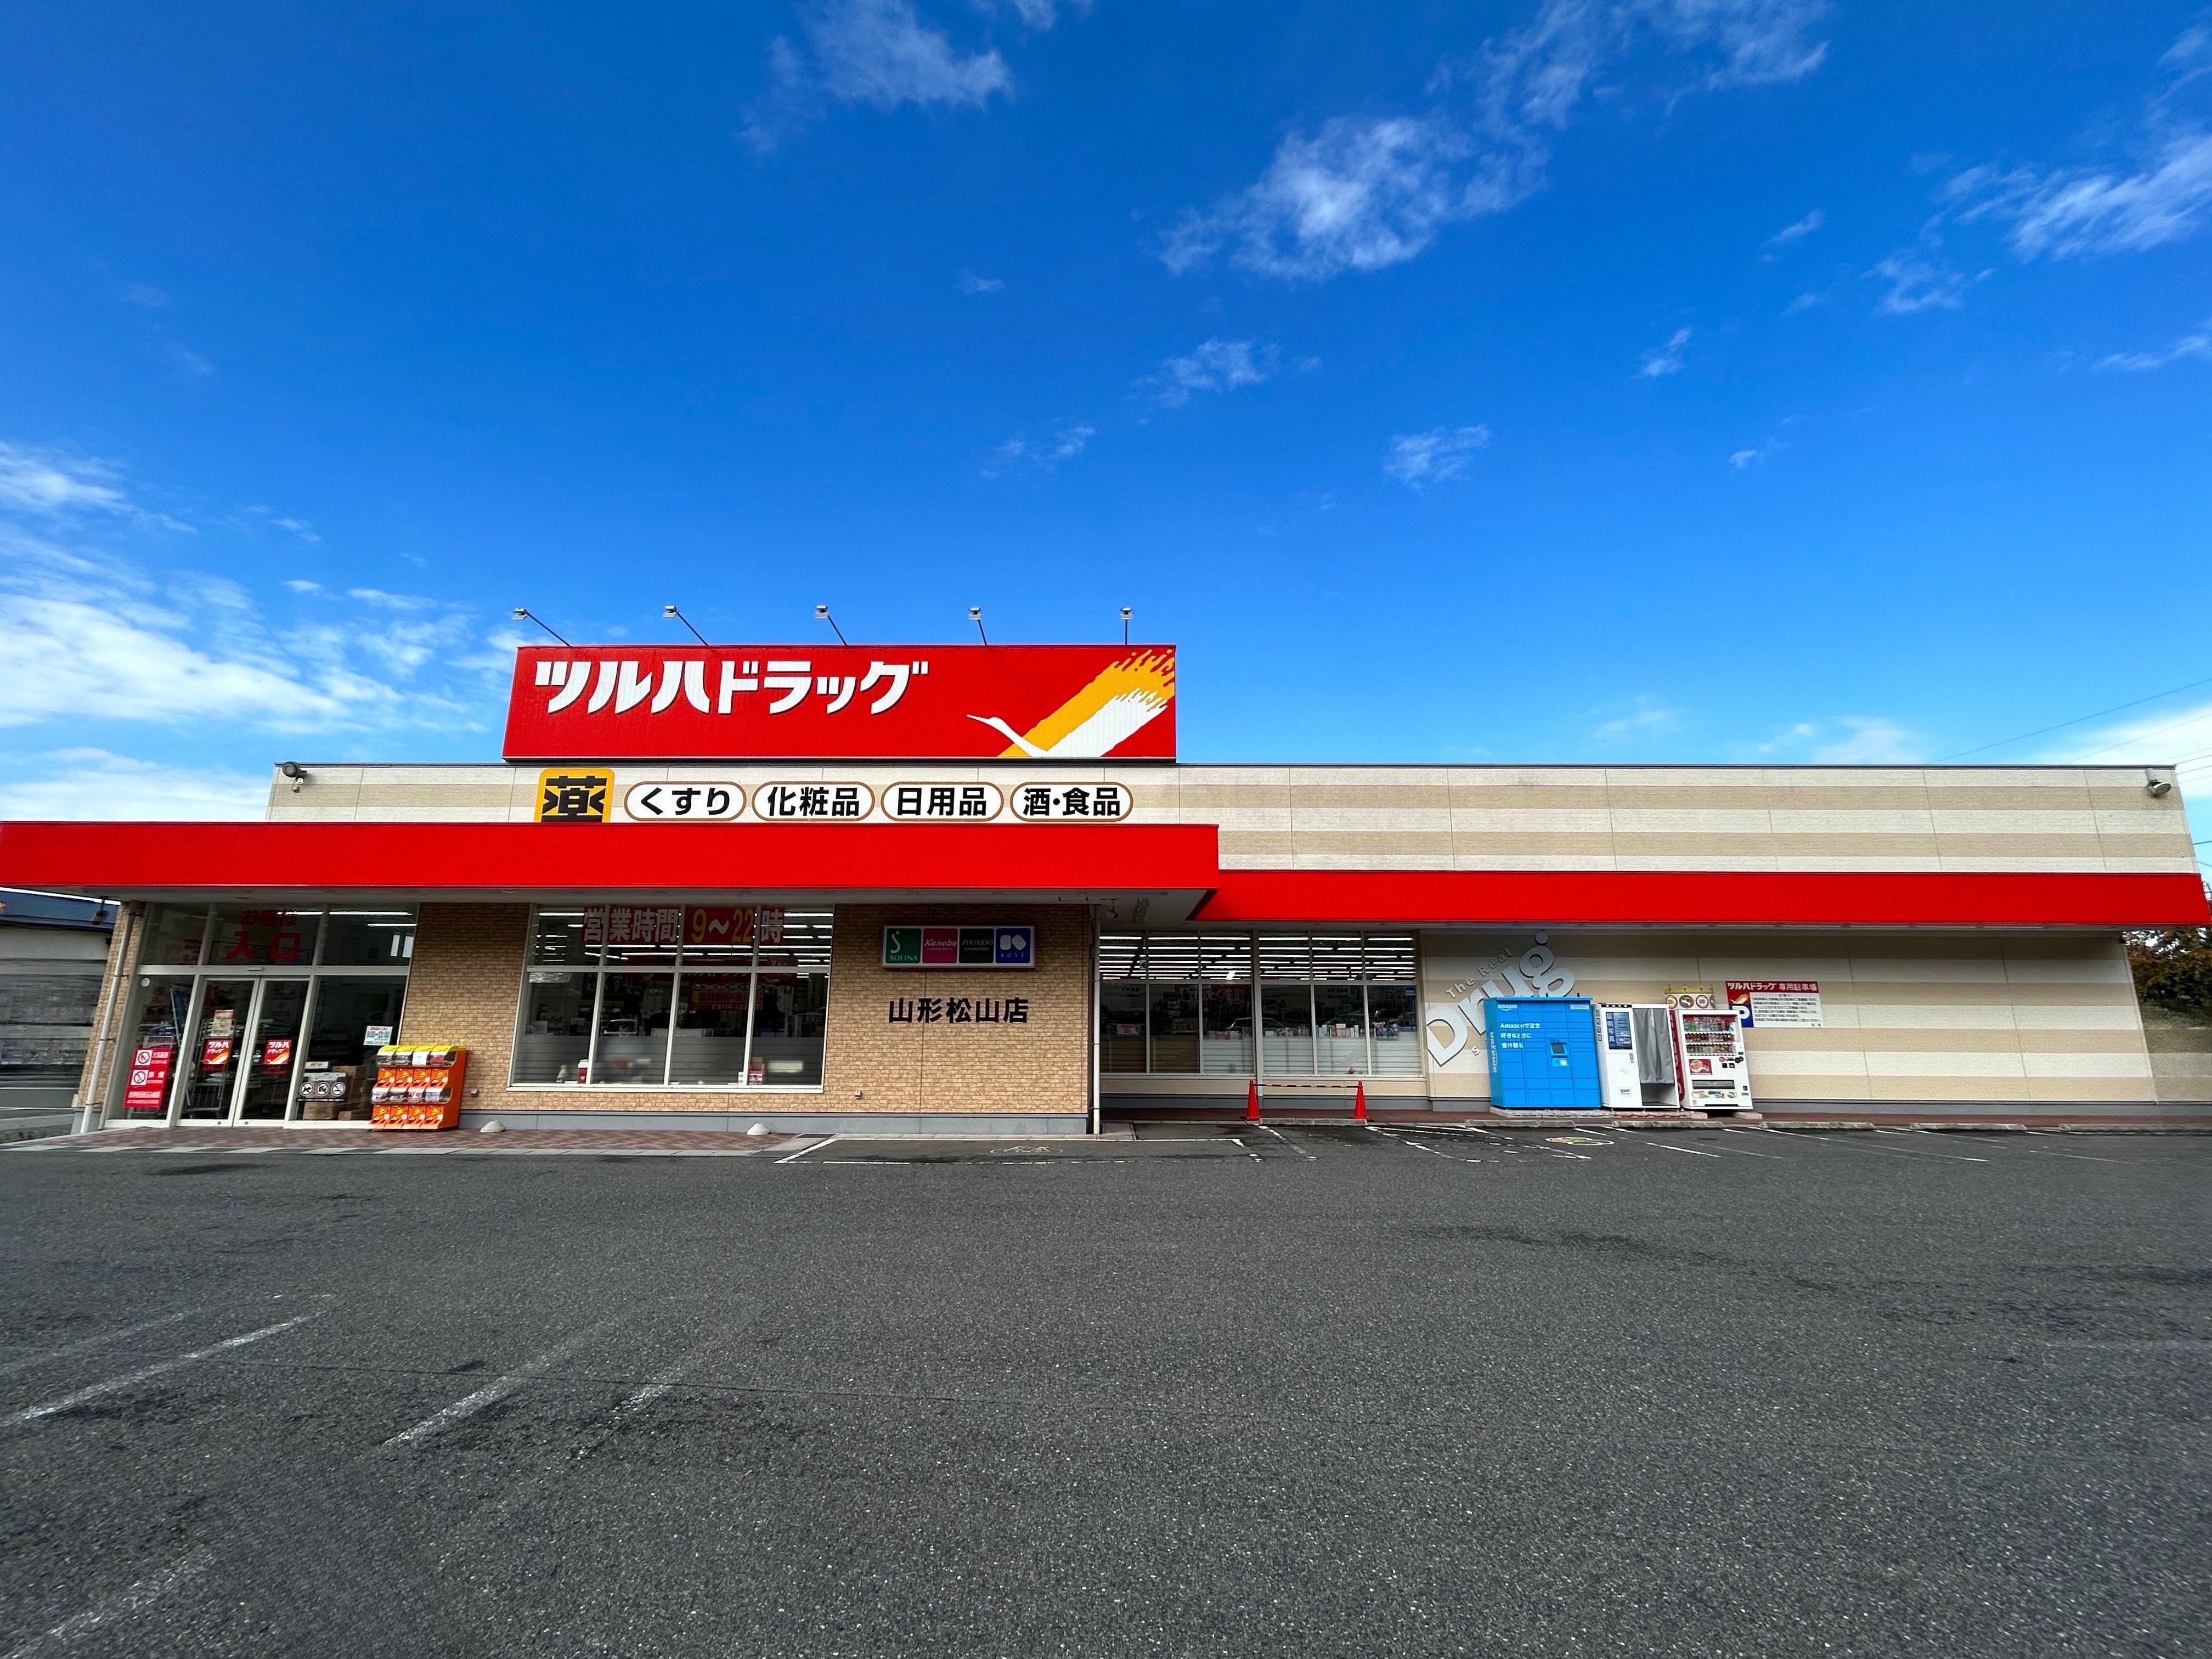 Images ツルハドラッグ 山形松山店